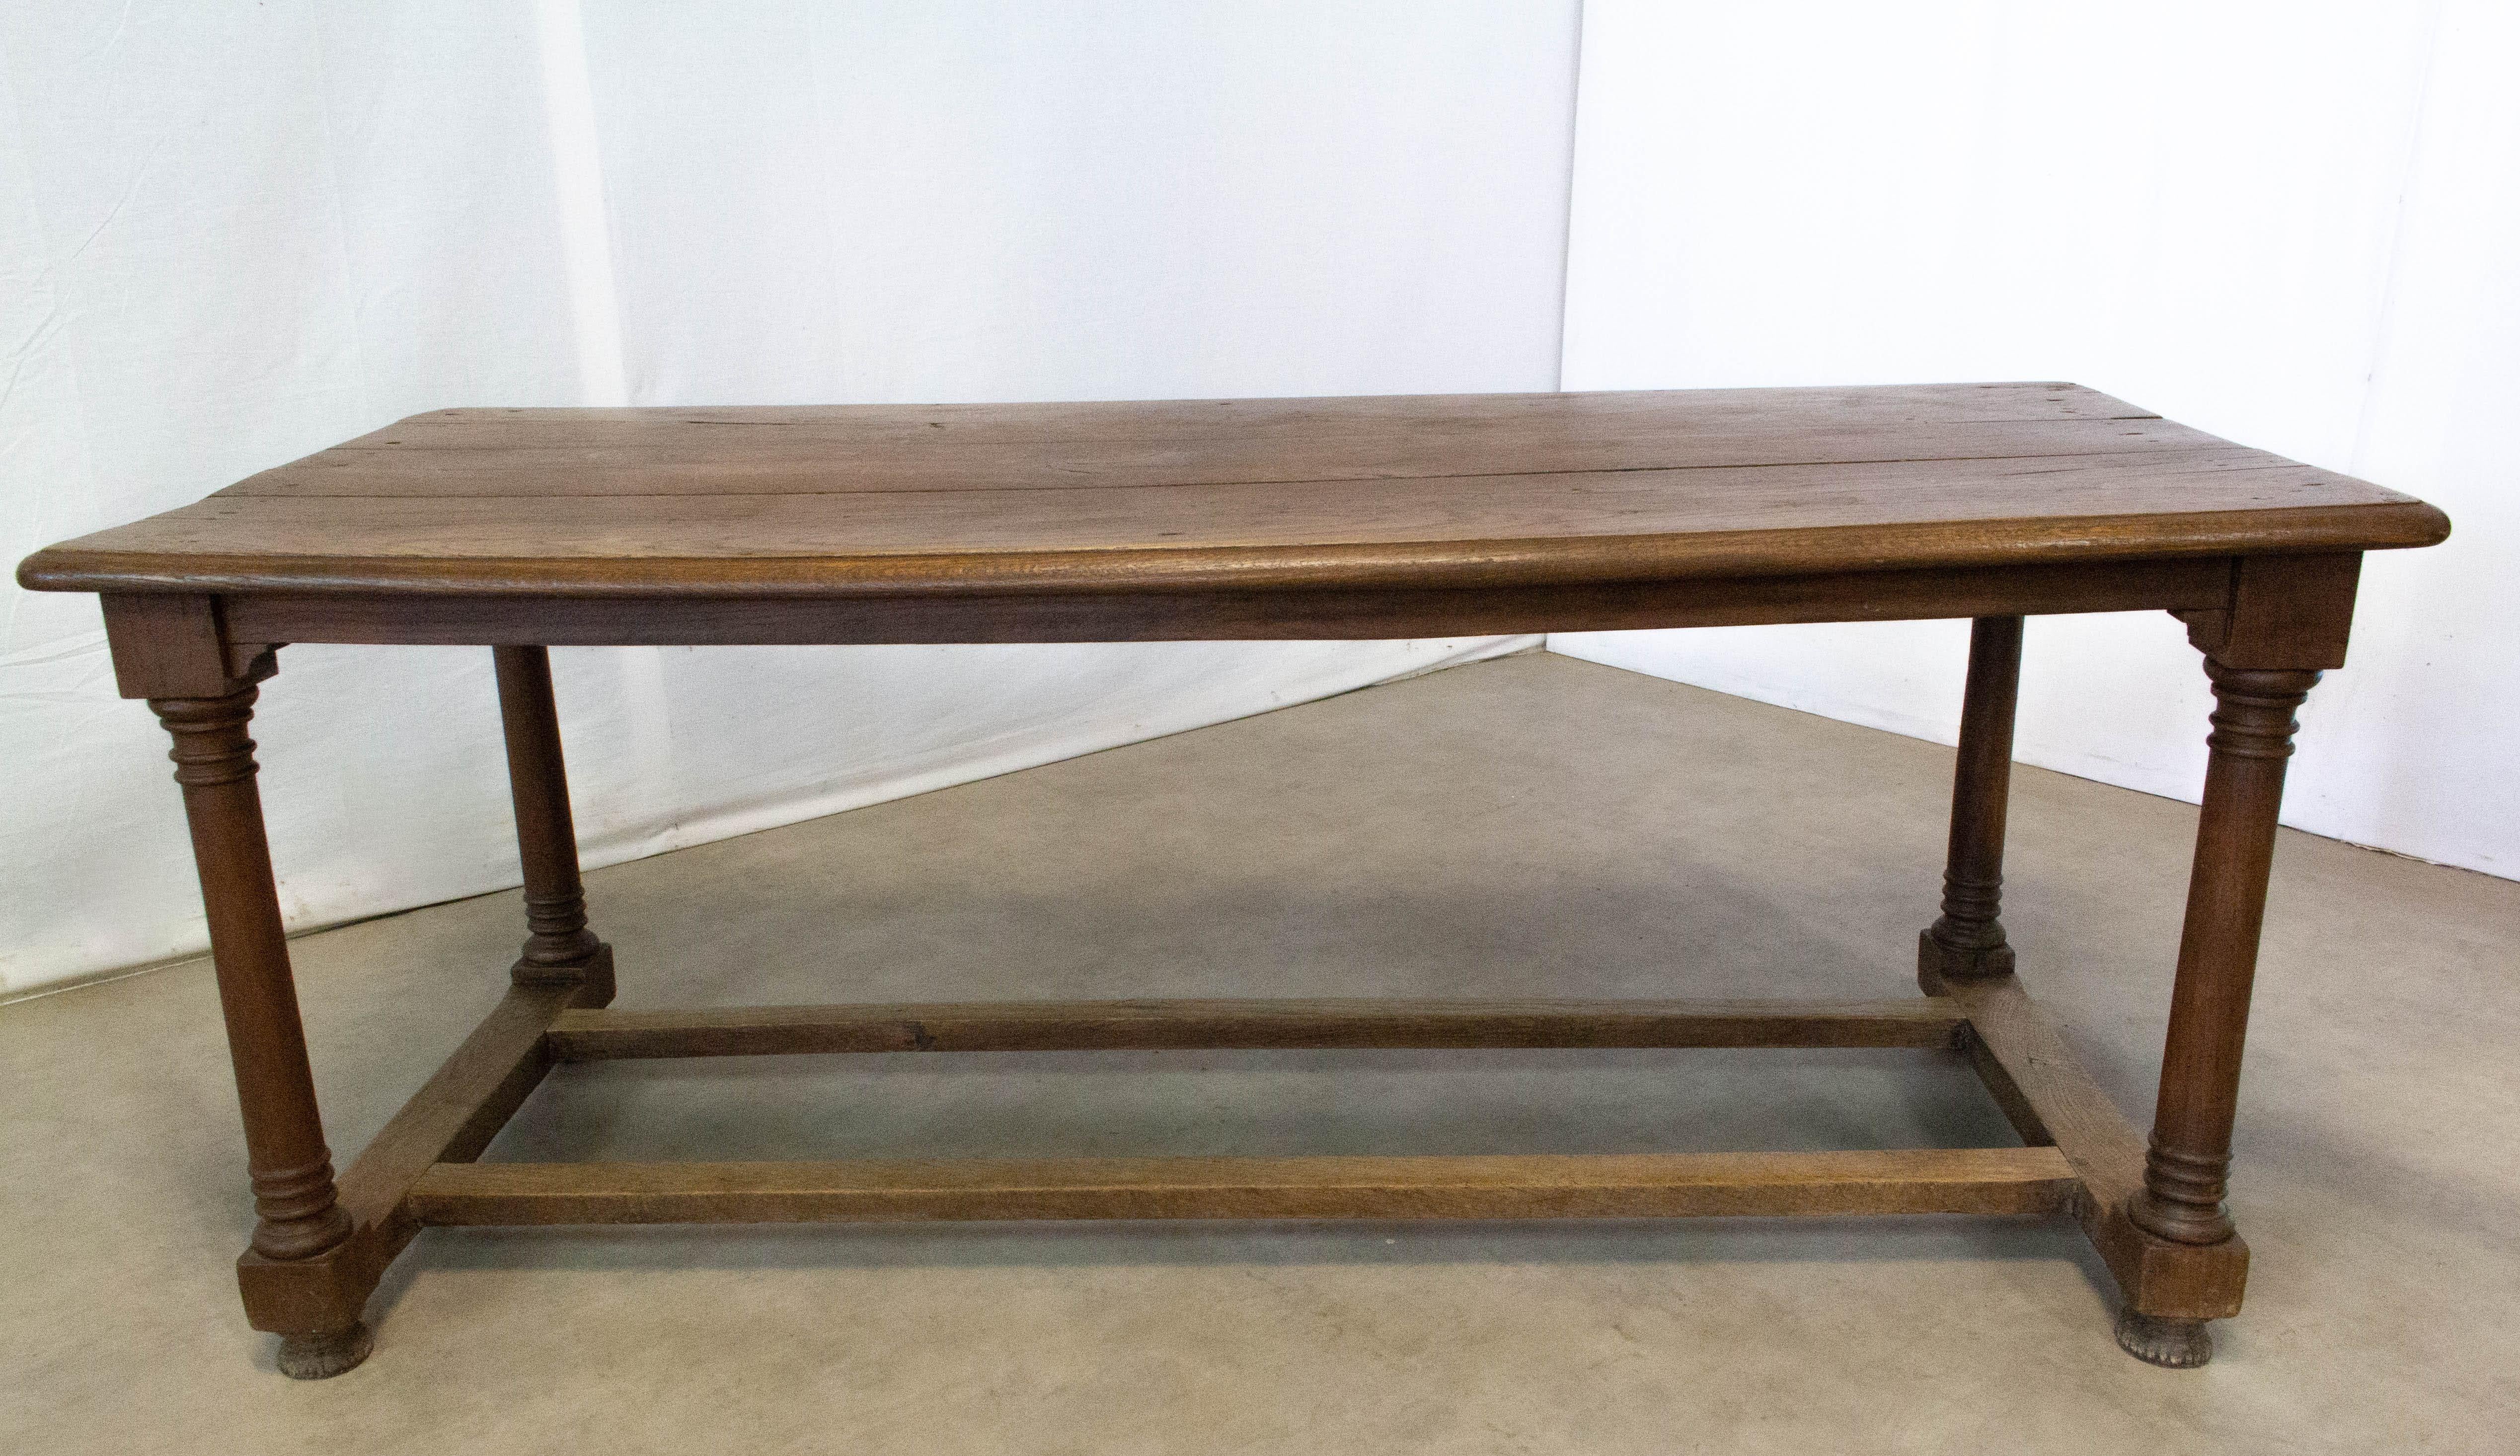 French Provincial French Refectory Table Late 18th Century Provincial Oak Server Dining Table